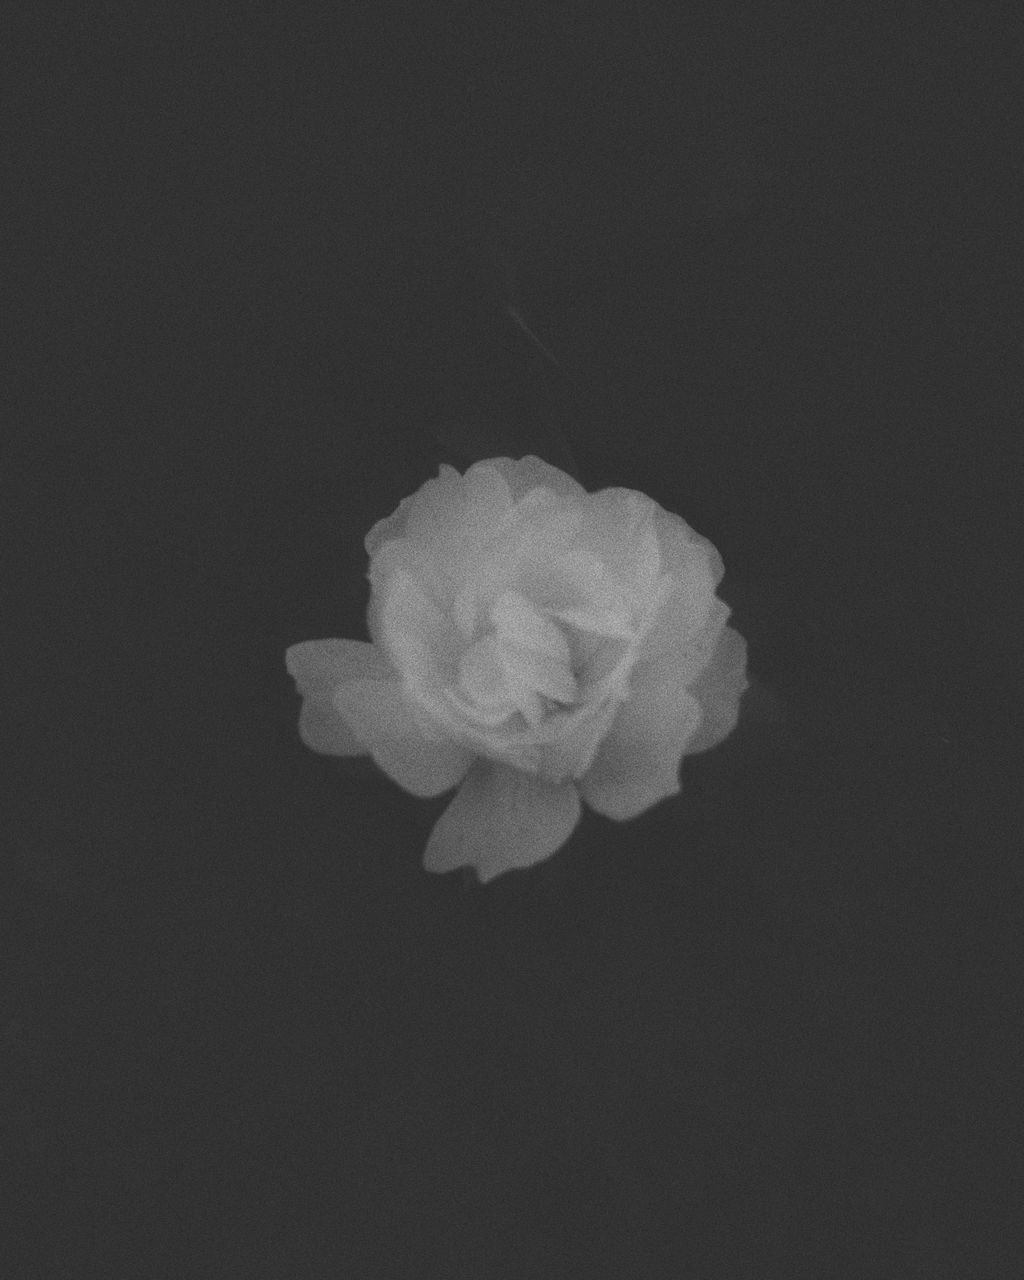 CLOSE-UP OF WHITE FLOWER AGAINST BLACK BACKGROUND